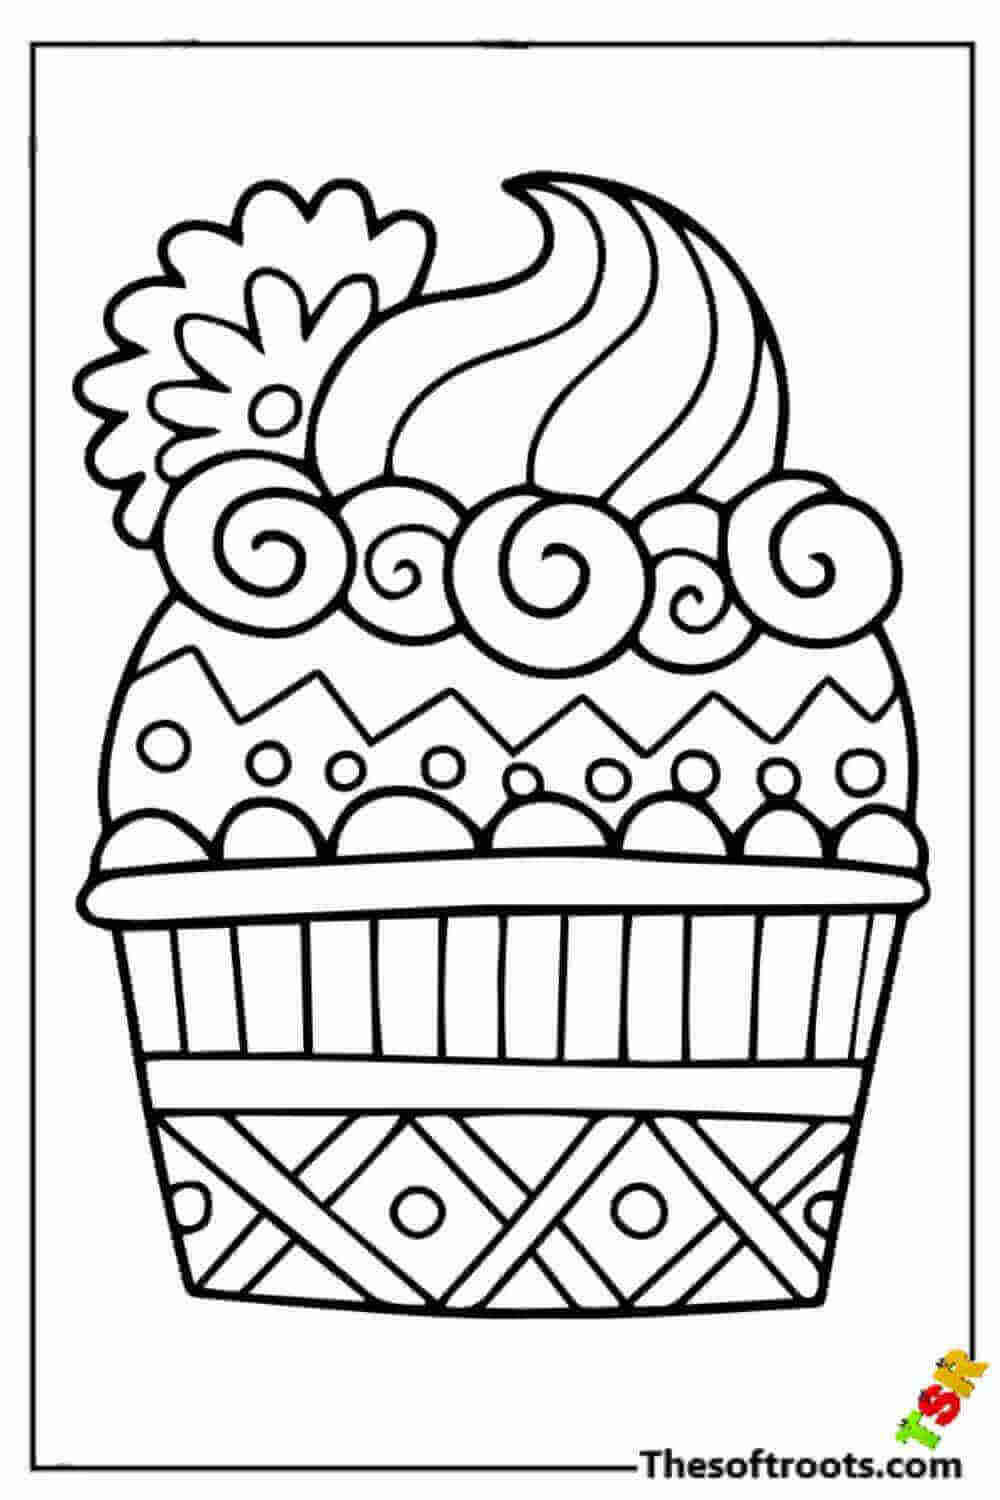 Cup cake Coloring Pages